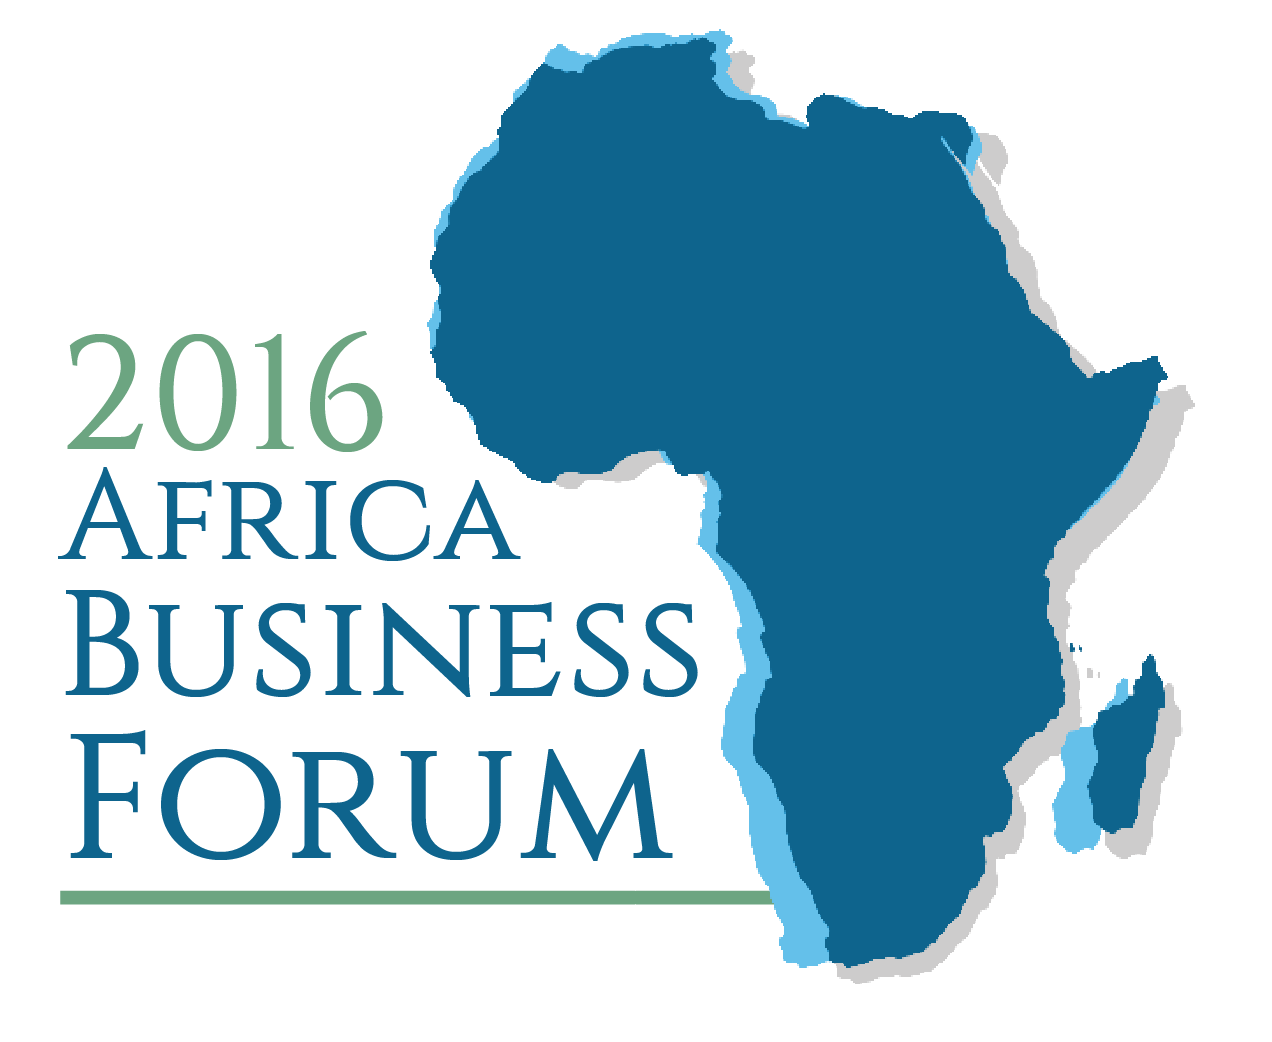 Presidential Precinct to Co-host Africa Business Forum with U.S.-Africa Business Center at the U.S. Chamber of Commerce